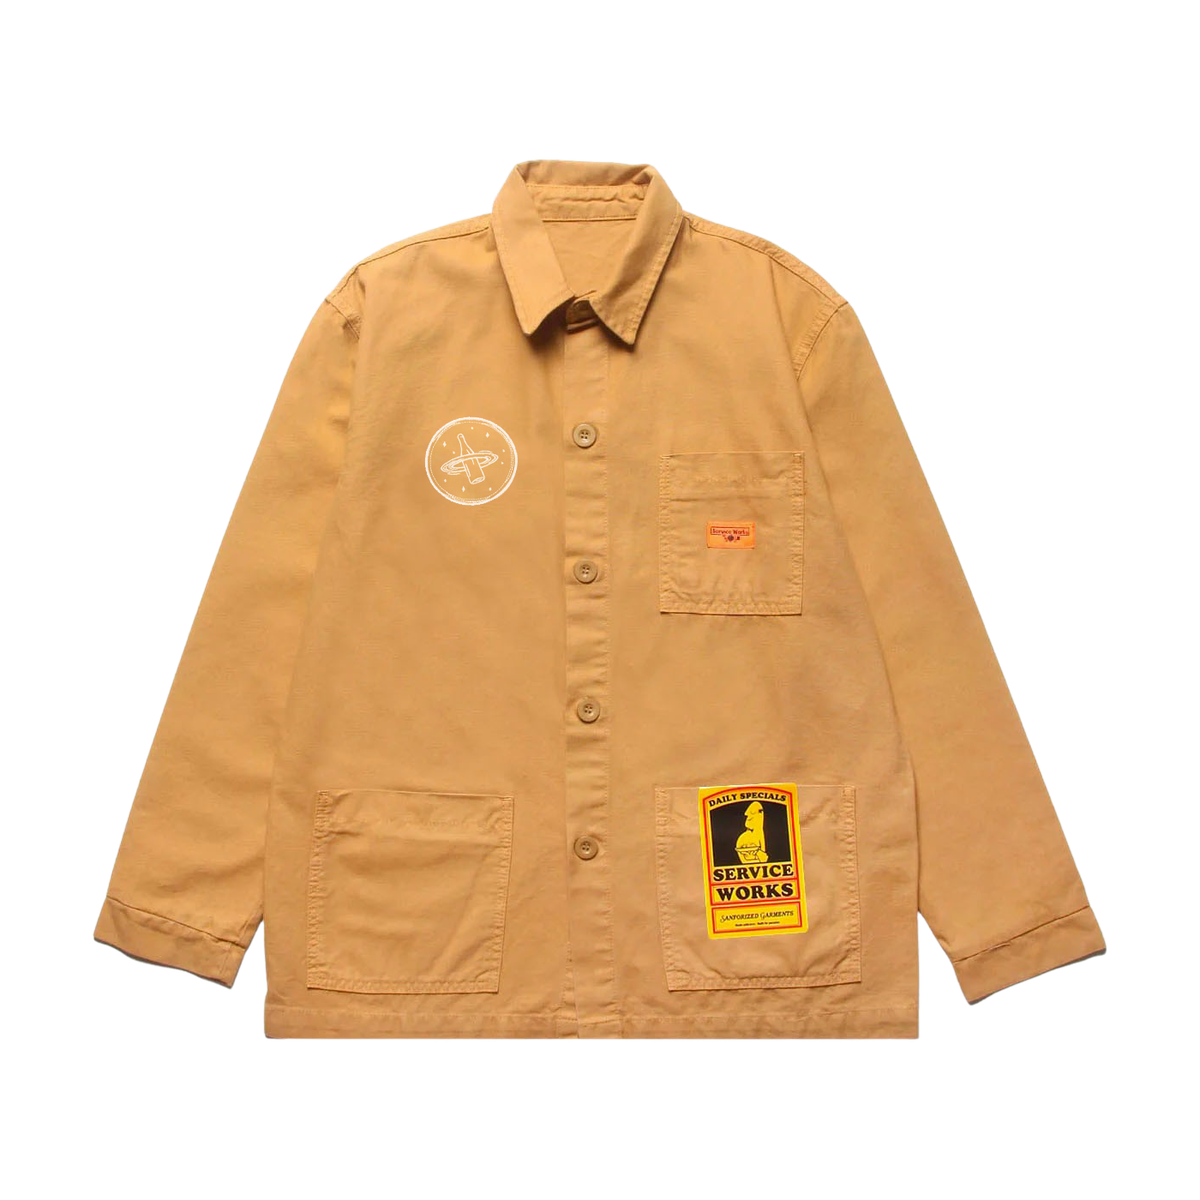 x Service Works Tan Coverall Jacket